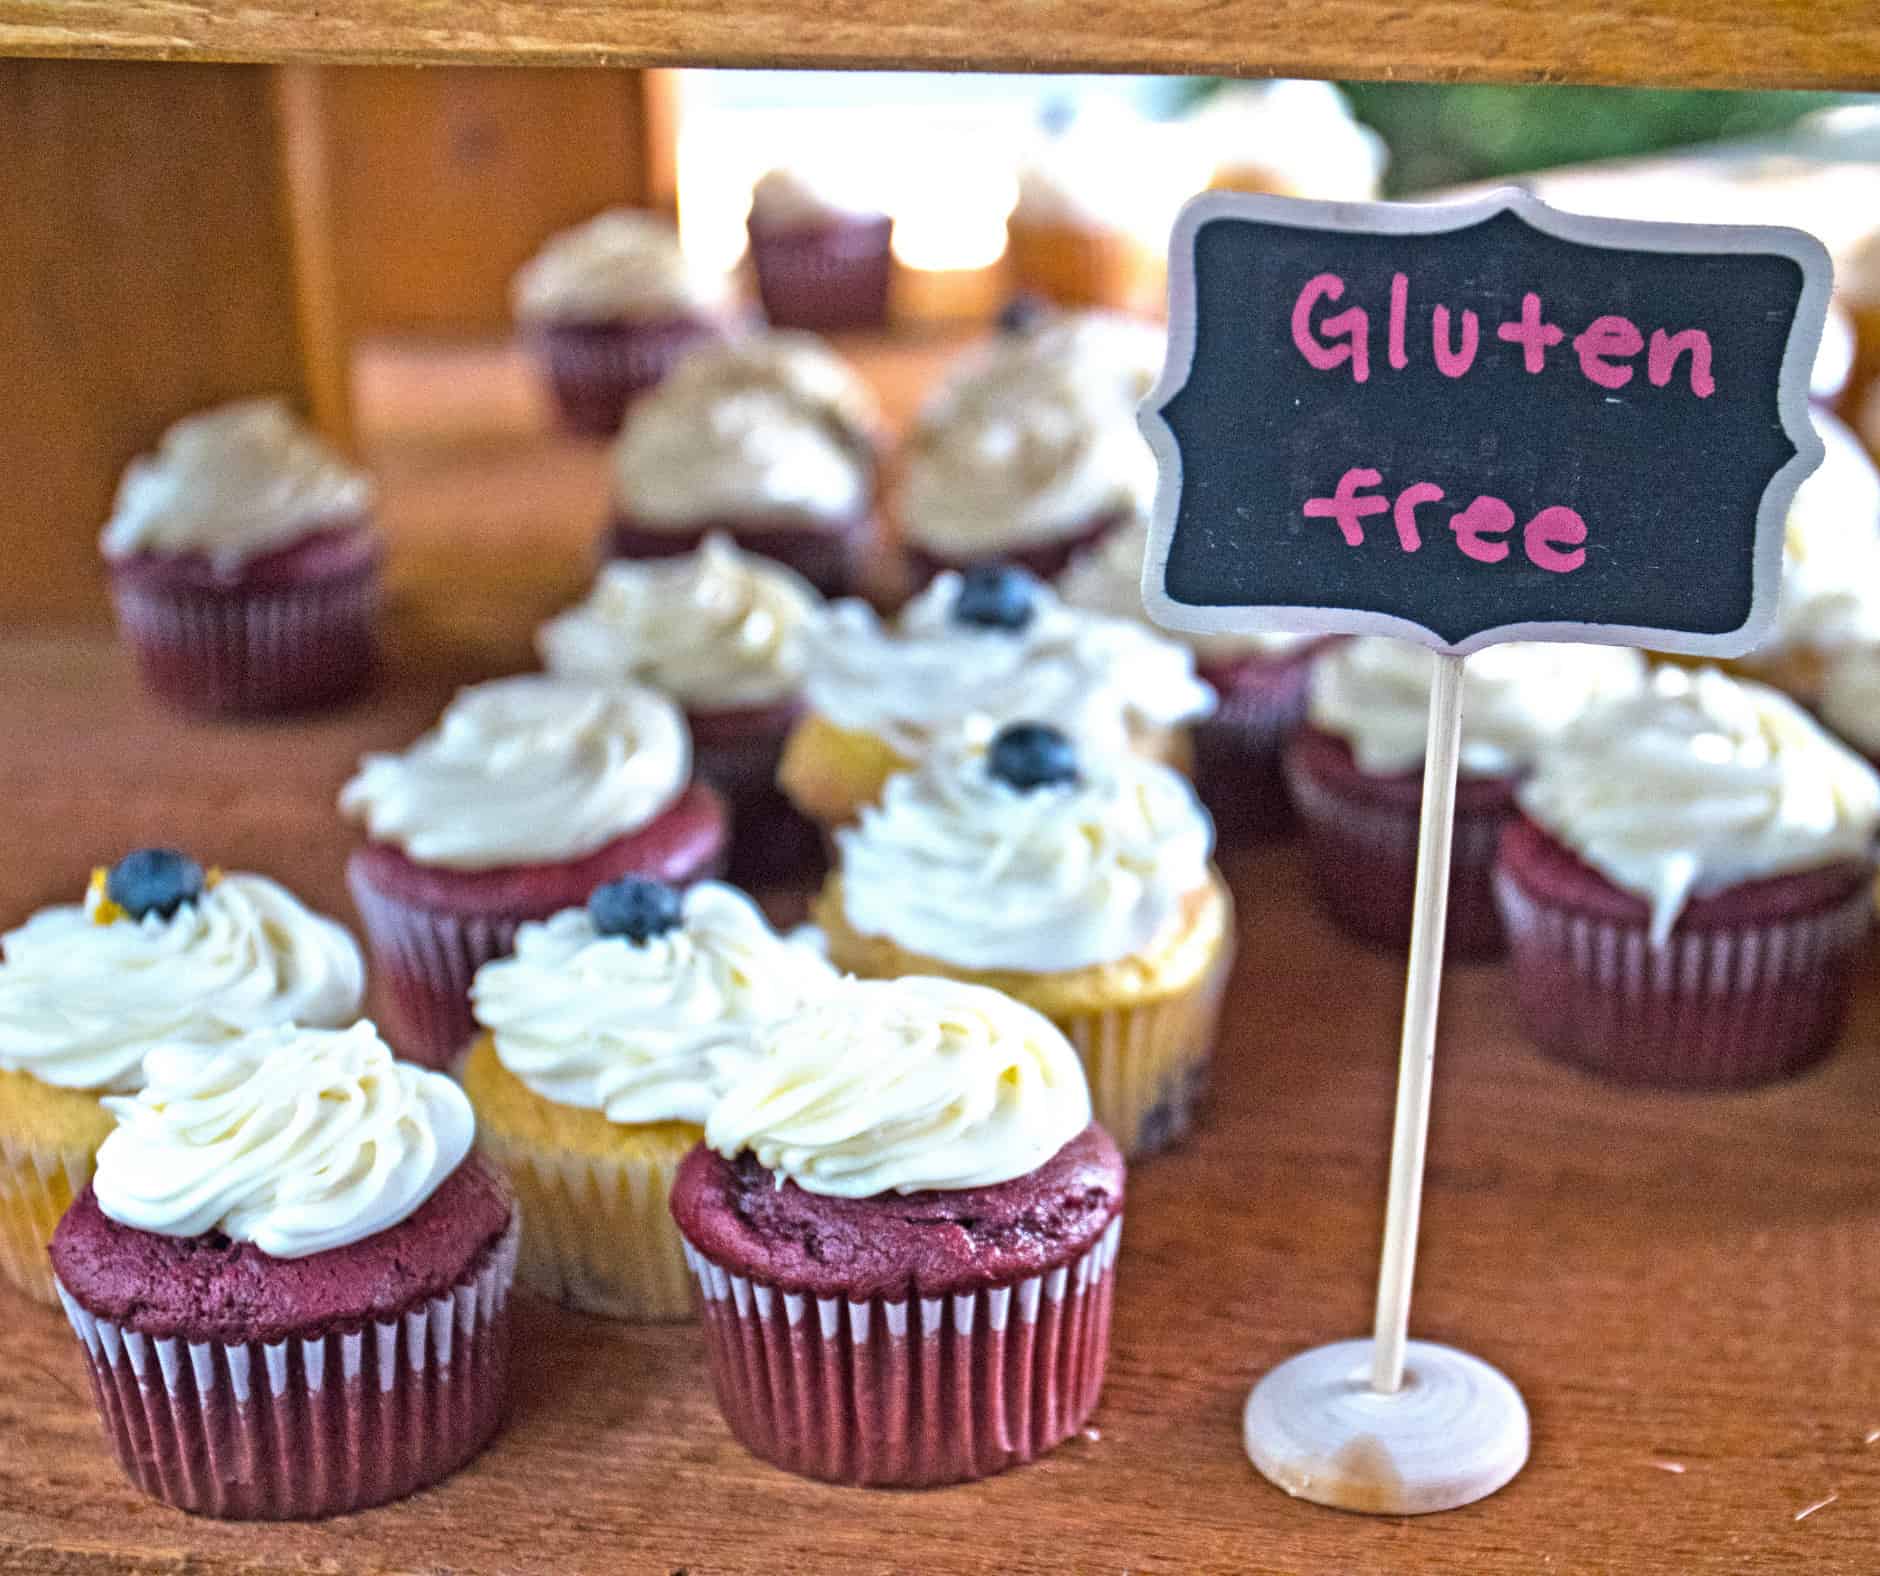 A photo of delicious looking gluten free cupcakes